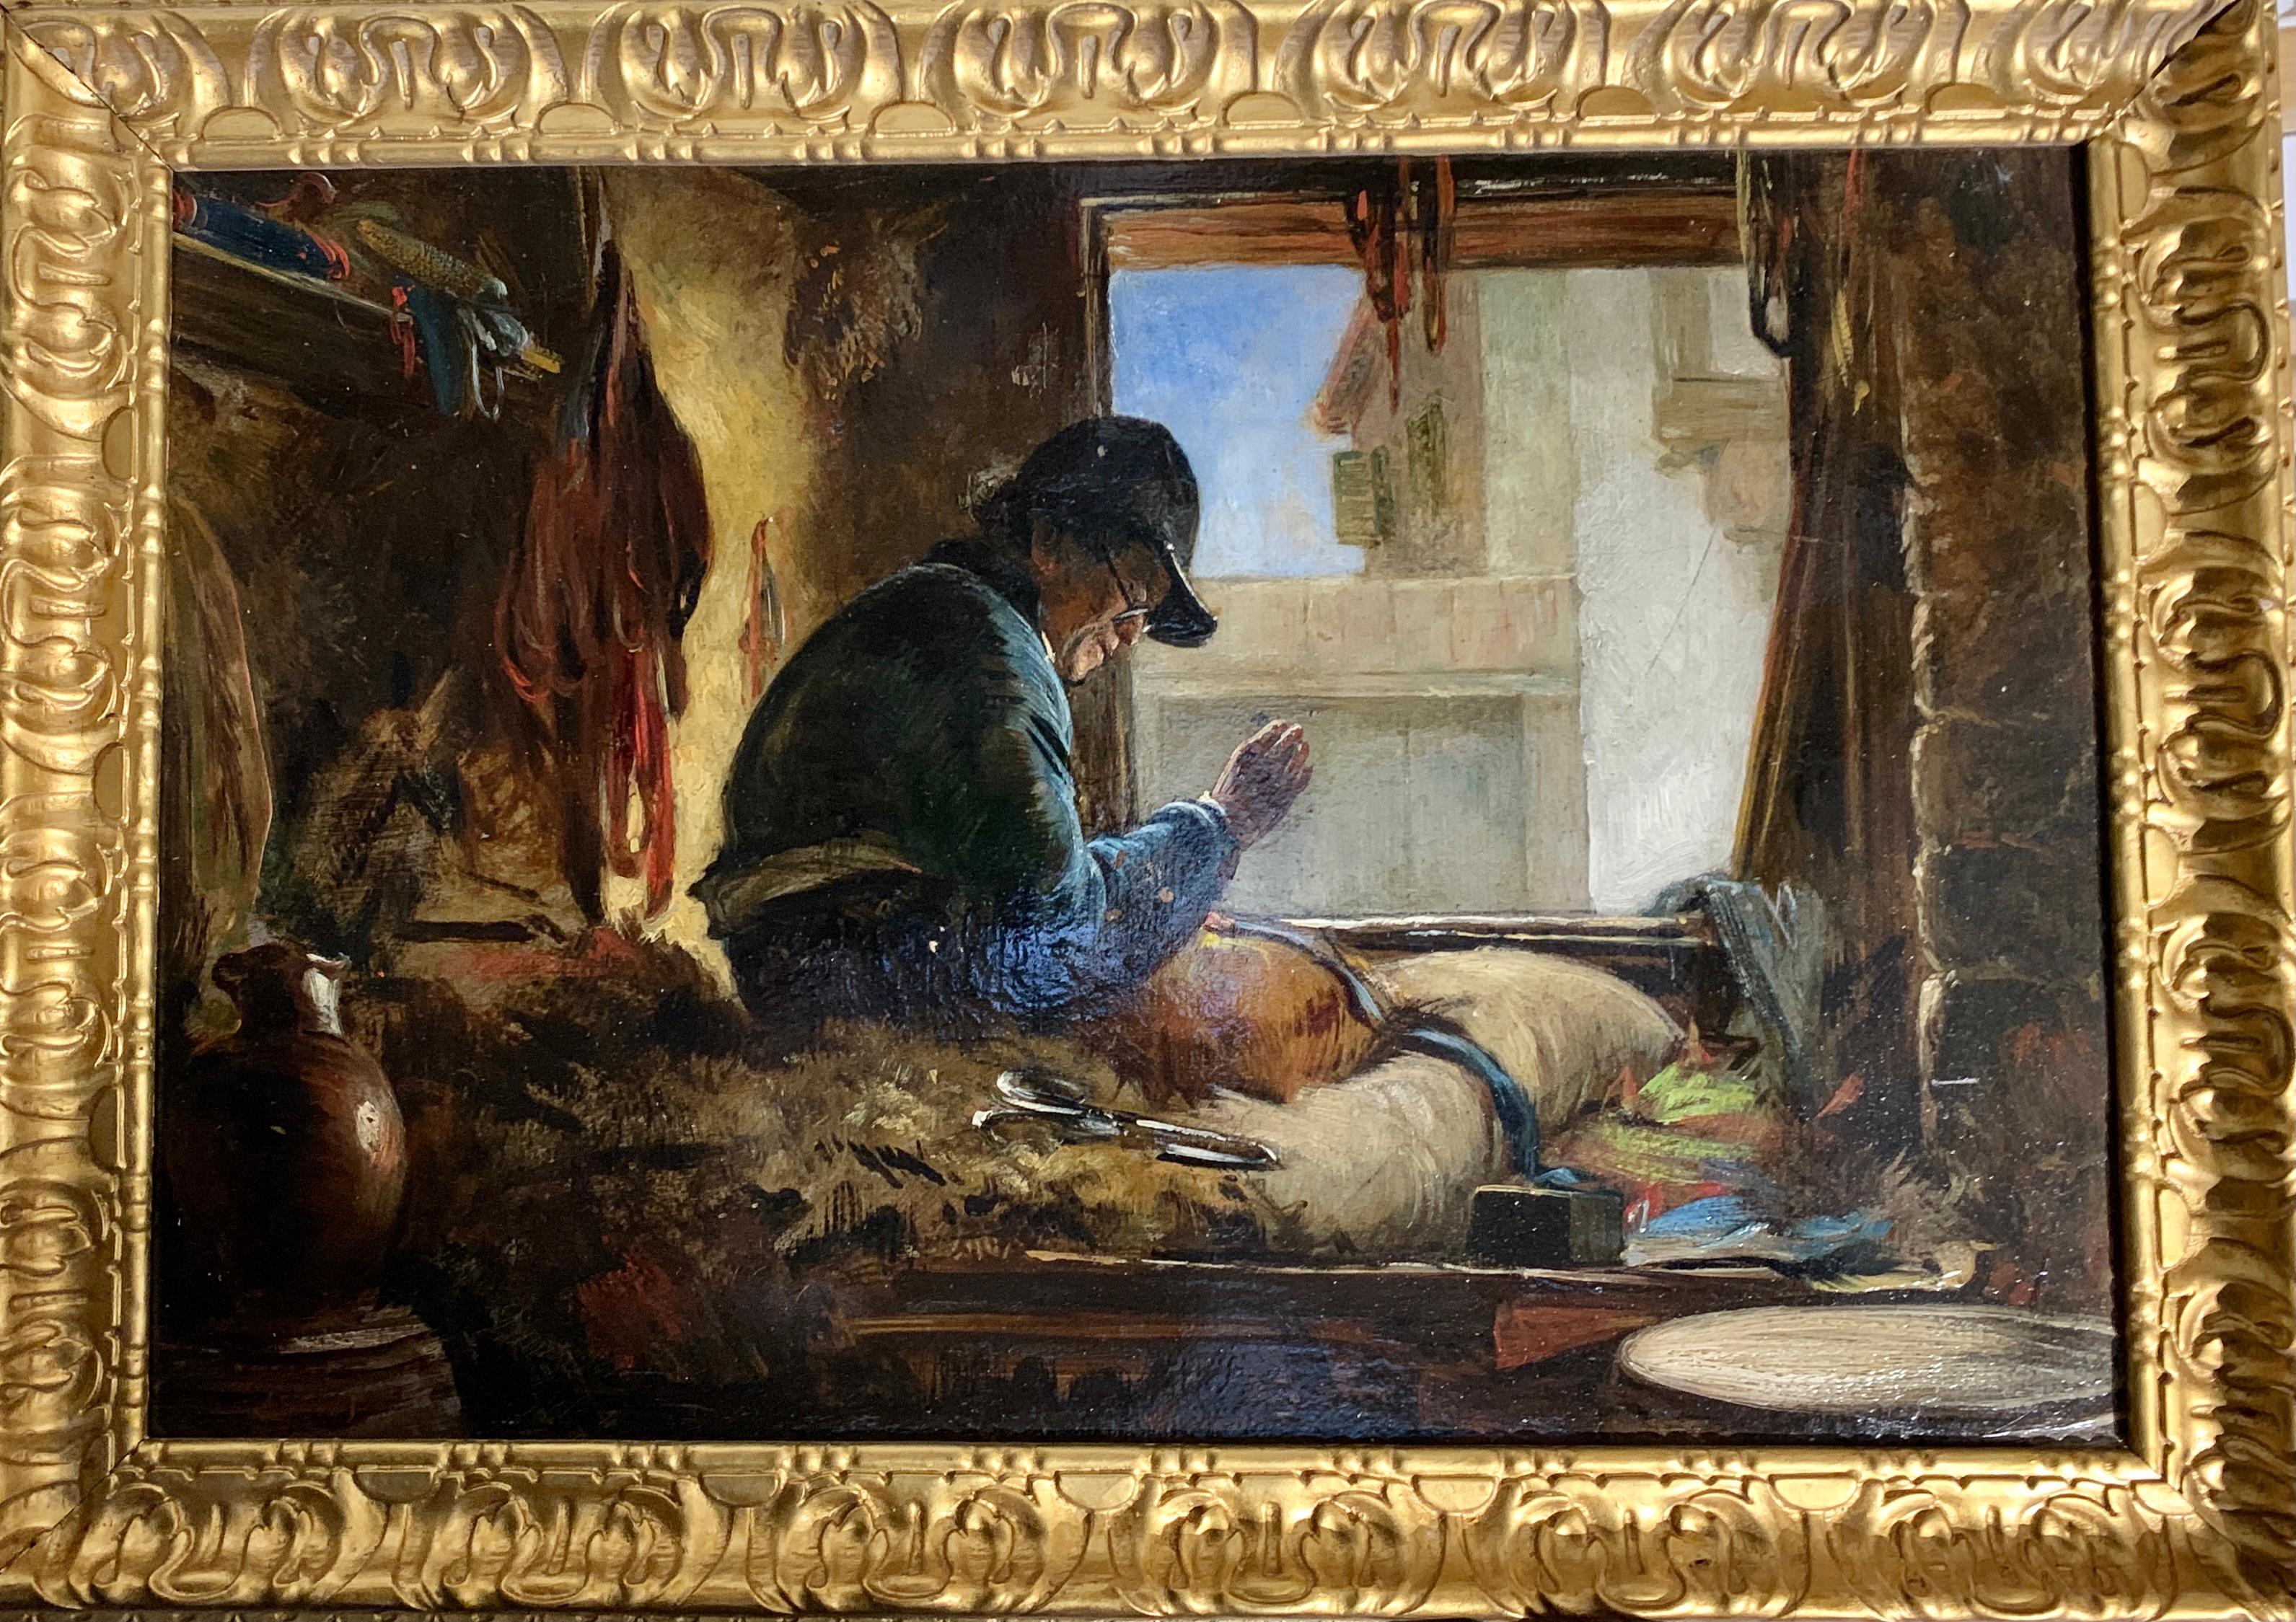 William James Muller Figurative Painting - 19th century English portrait of a man sowing cloth or leather in his studio